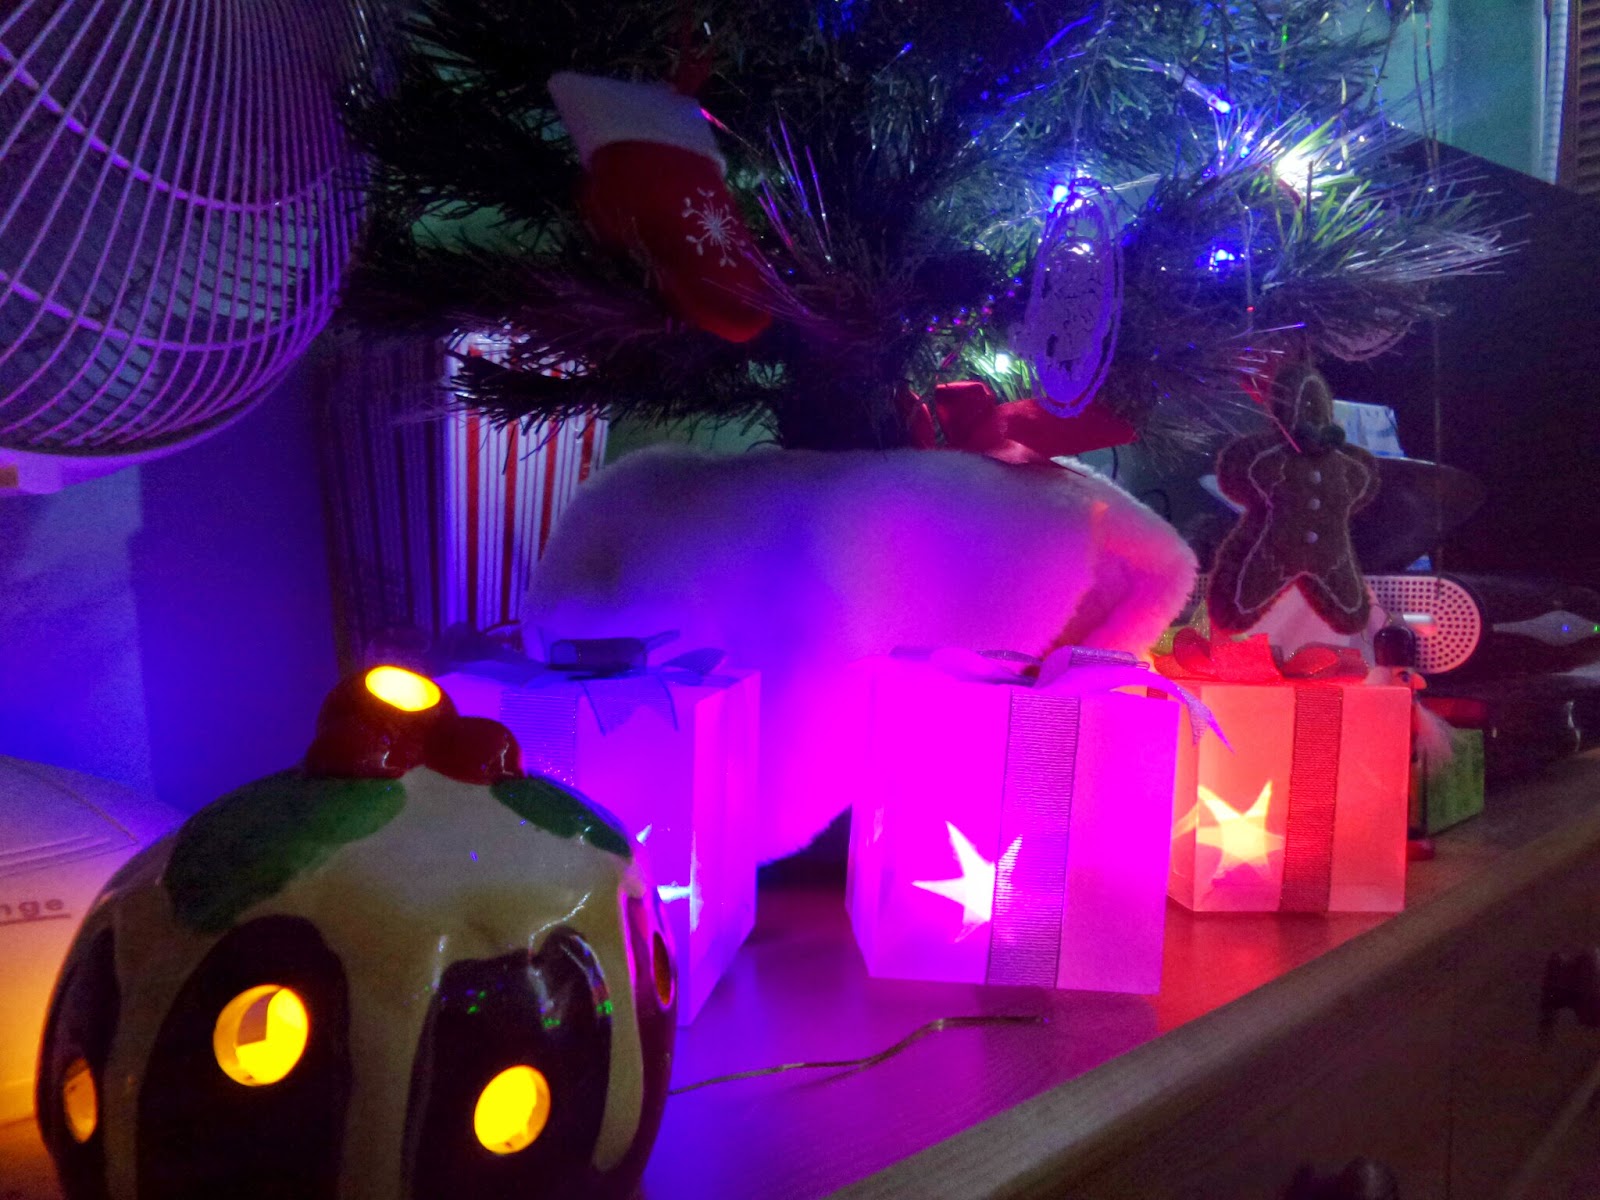 Light up gifts under the Christmas tree (and a tealight candle holder Christmas pudding shaped!)